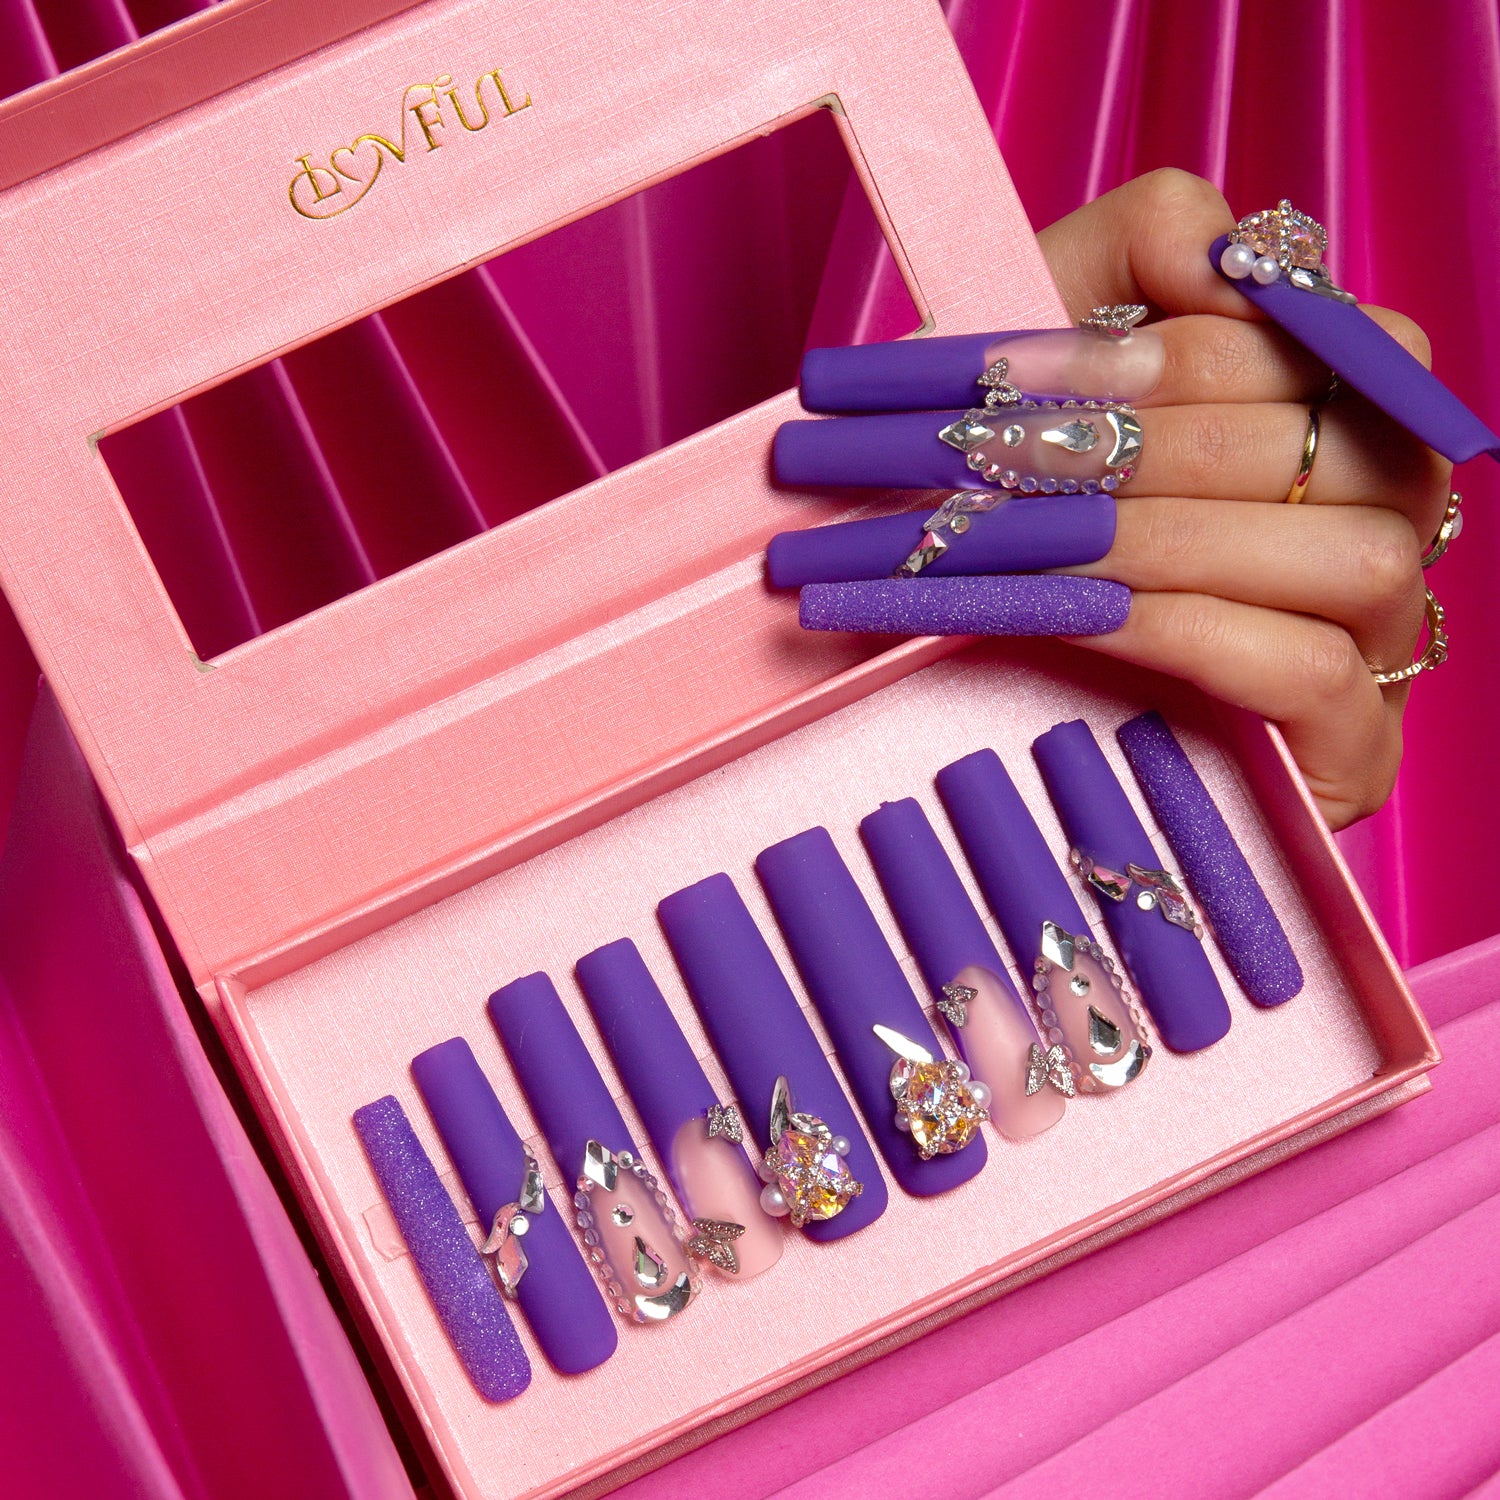 Mystique Veil press-on nails by Lovful displayed in a pink box. The deep purple nails feature butterfly designs, gem accents, and glitter overlays. A hand with the nails applied holds the box, set against a pink fabric background.